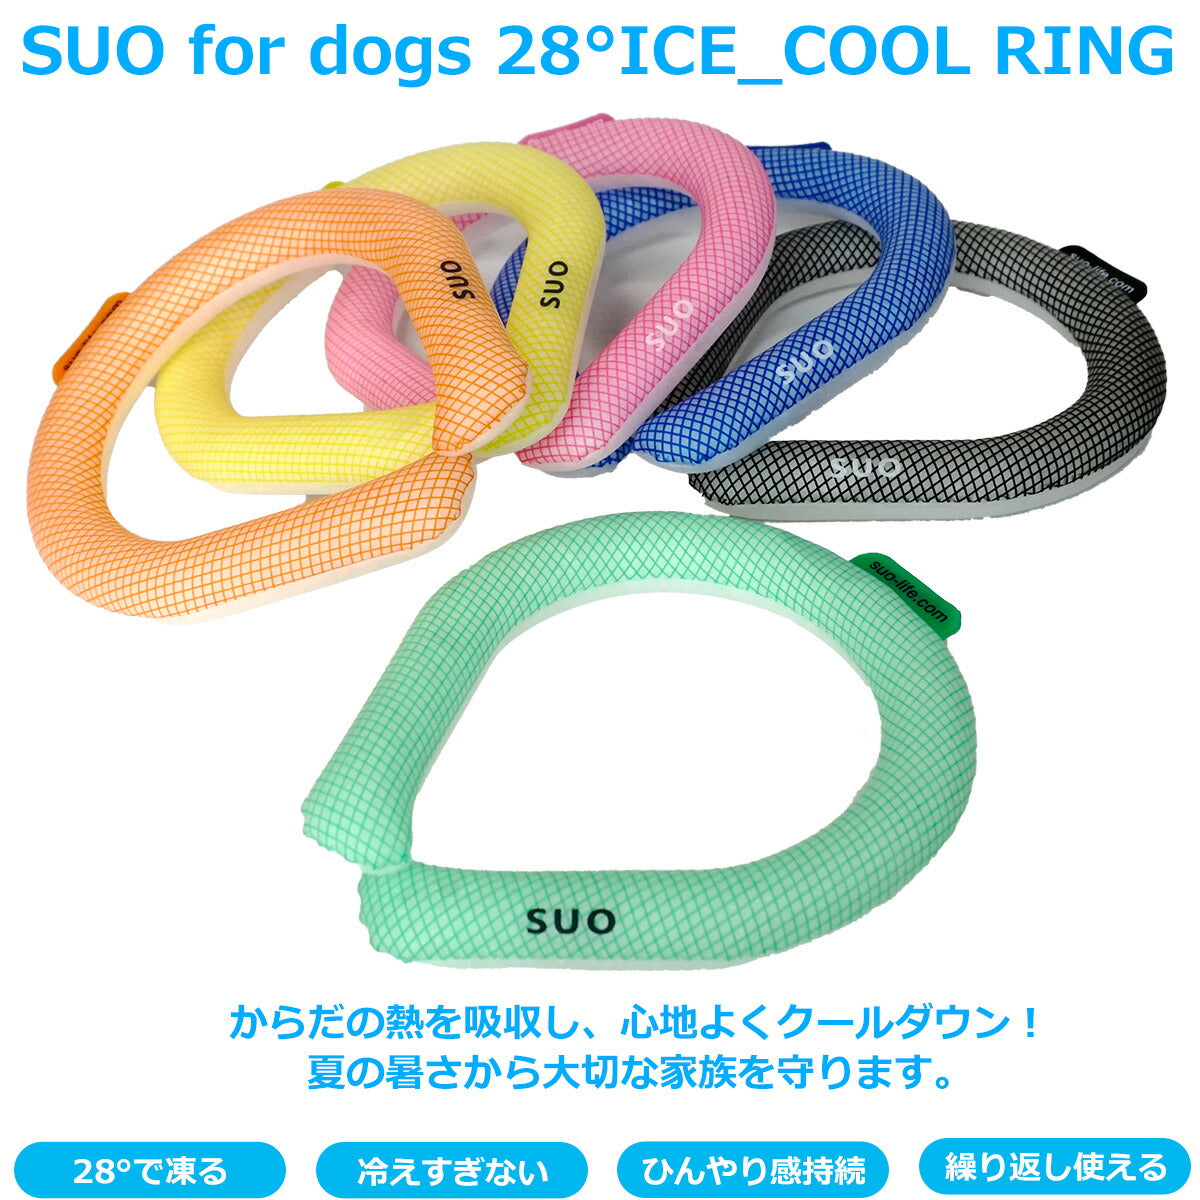 SUO for dogs 28°ICE SUOリング ボタンなし SS イエロー 熱中症対策グッズ 暑さ対策 ひんやり 首 冷感 犬 大人 子供